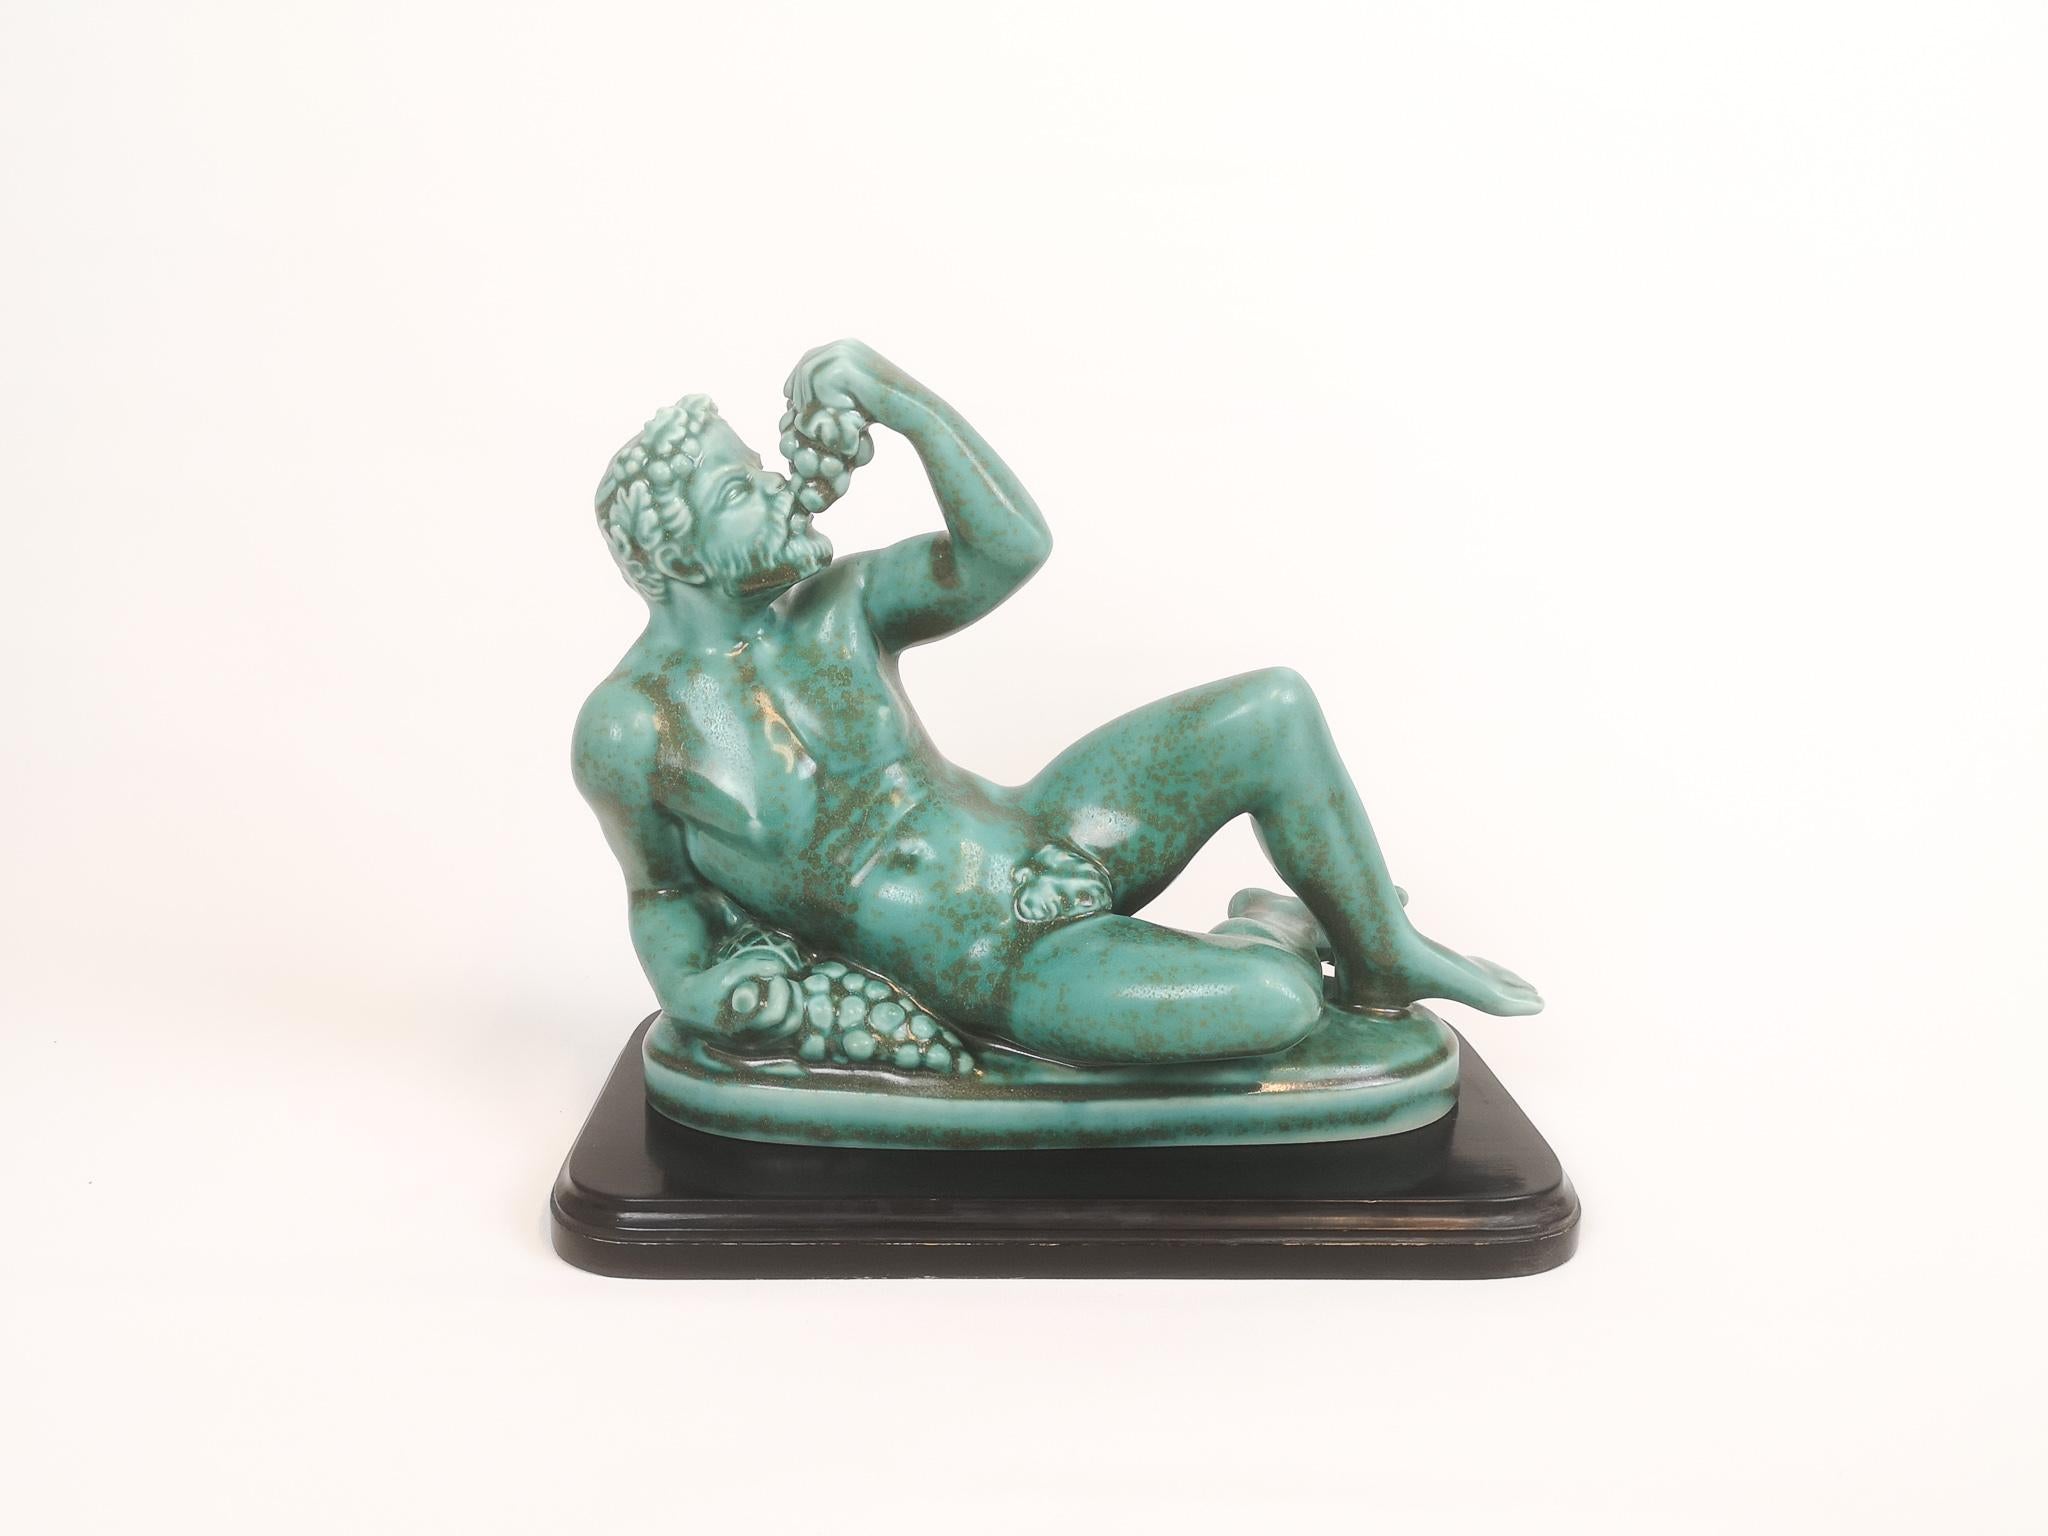 The portrait made as small staty of Bacchus the roman wine god for Rörstrand in 1944, designed by Danish designer Harald Salomon. Bacchus has wonderful detailed lines and the green glaze gives life to the sculpture. 

Very good